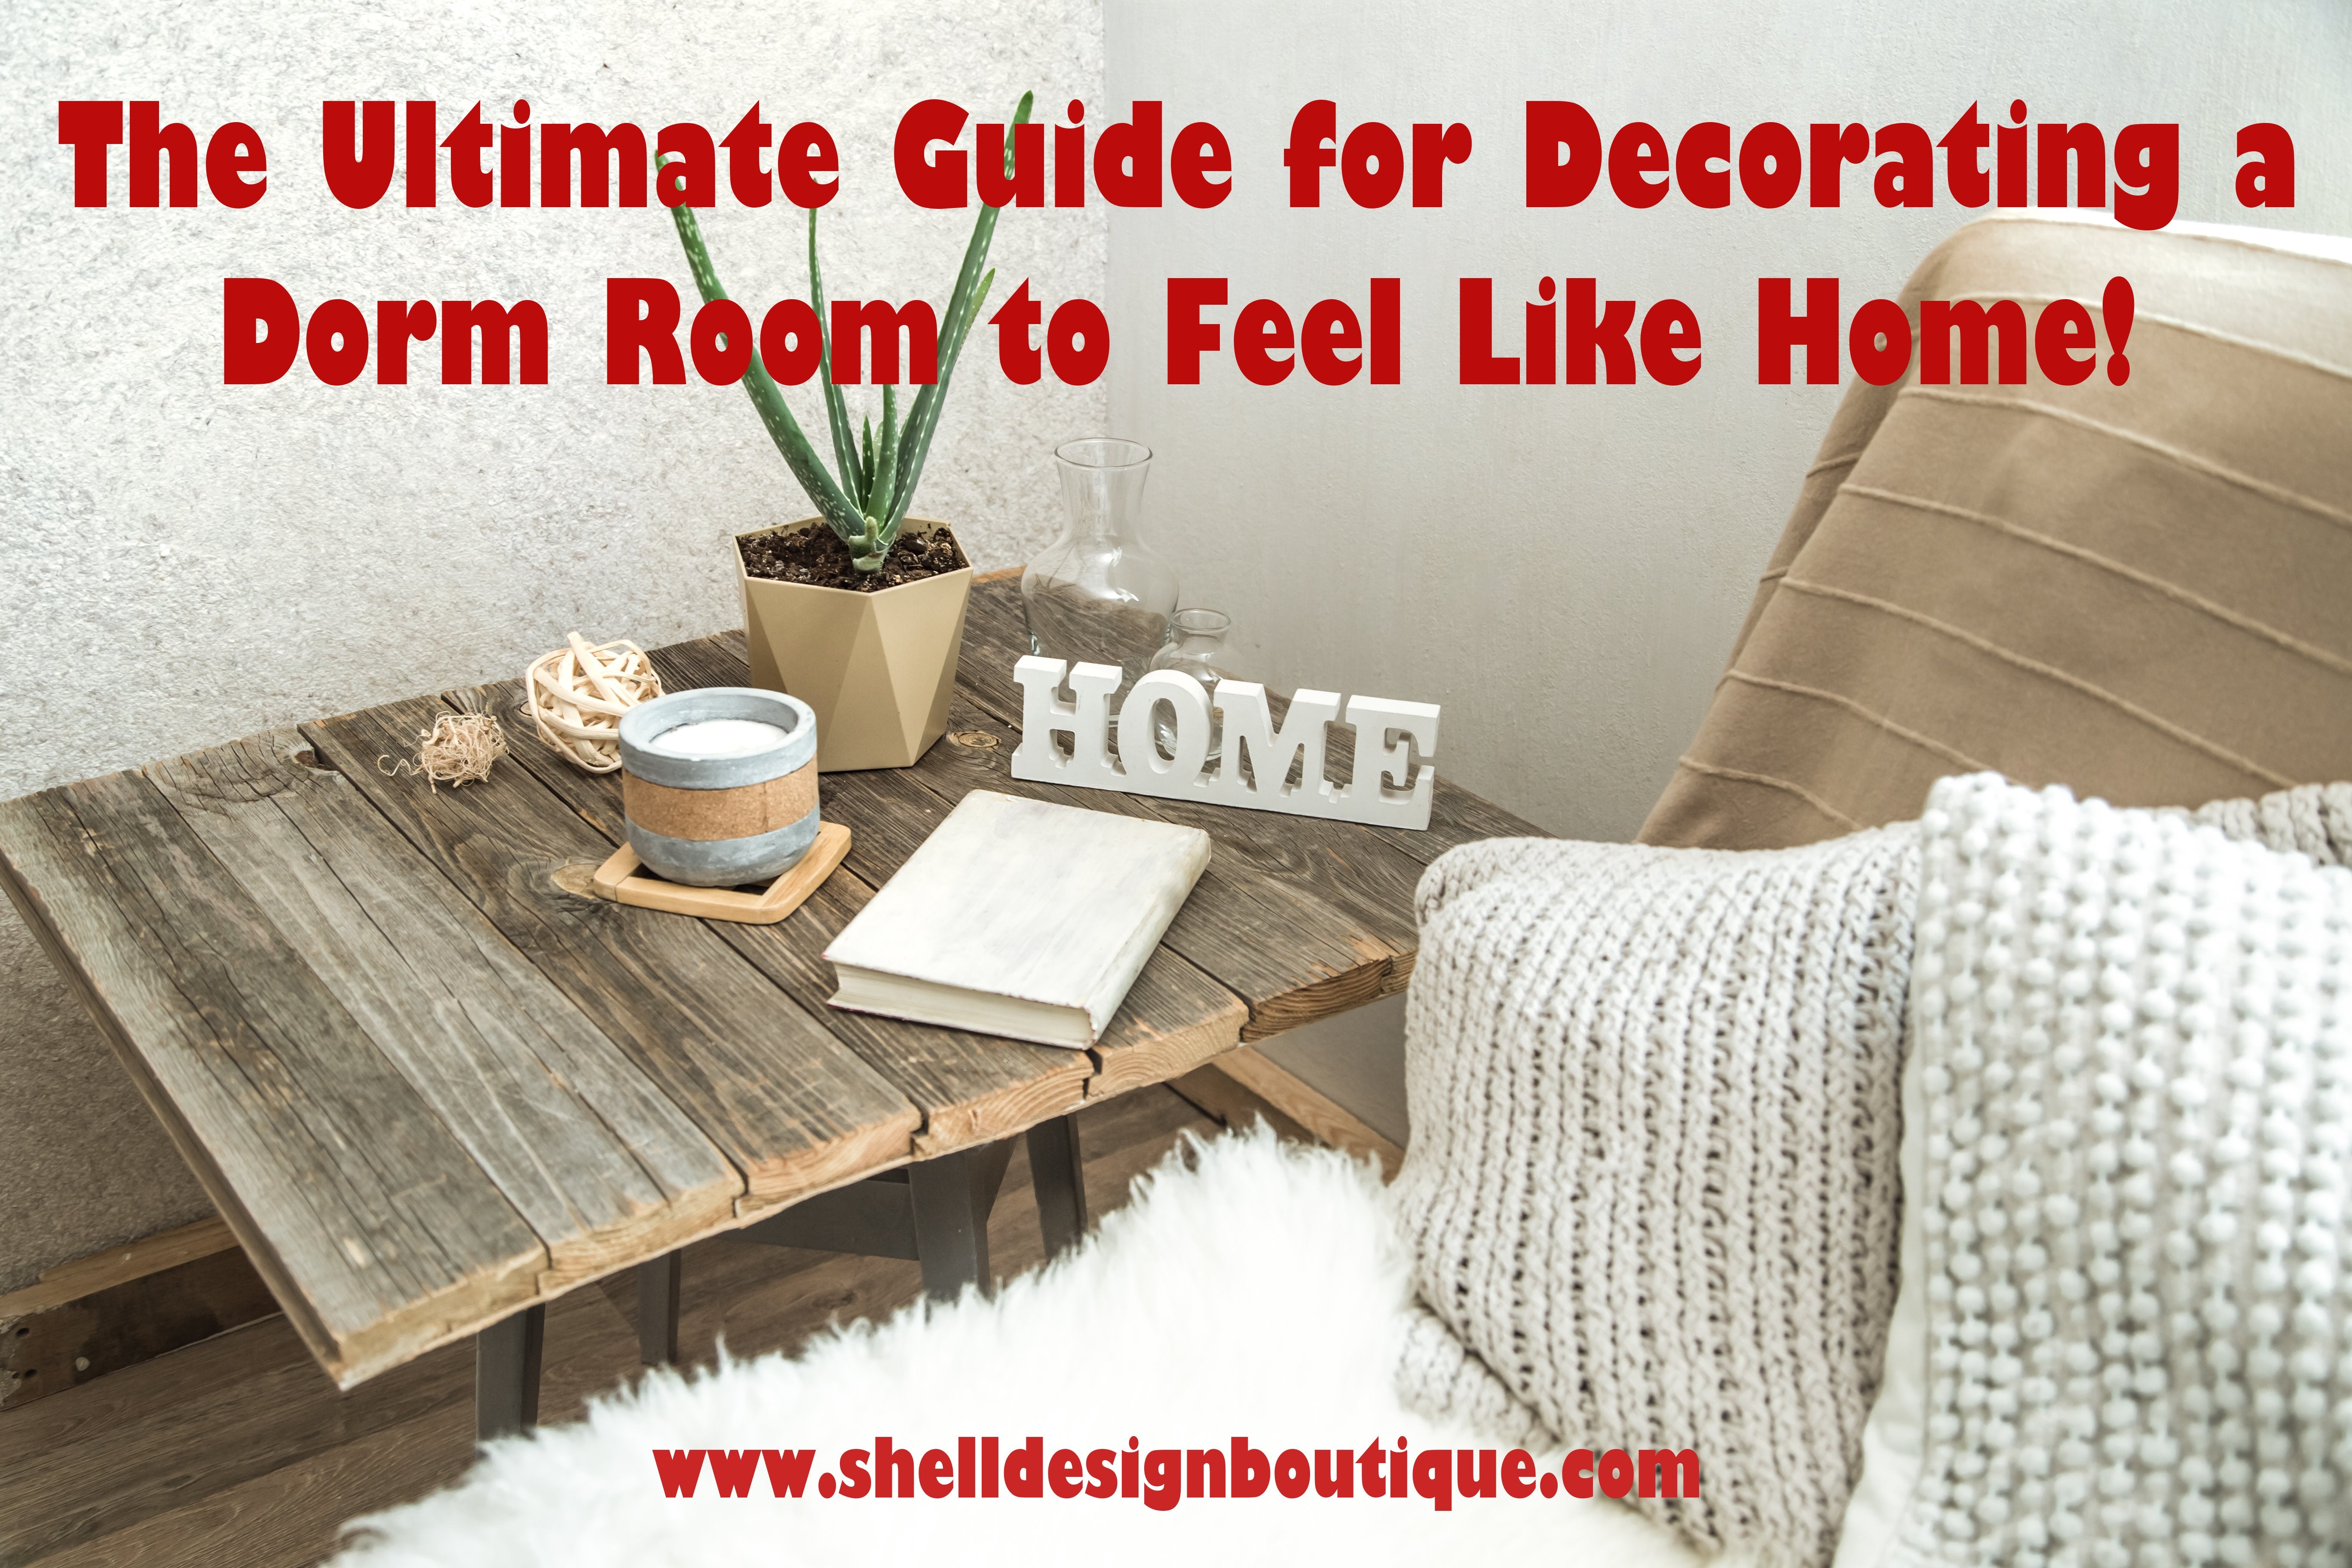 The Ultimate Guide for Decorating a Dorm Room to Make it Feel Like Home